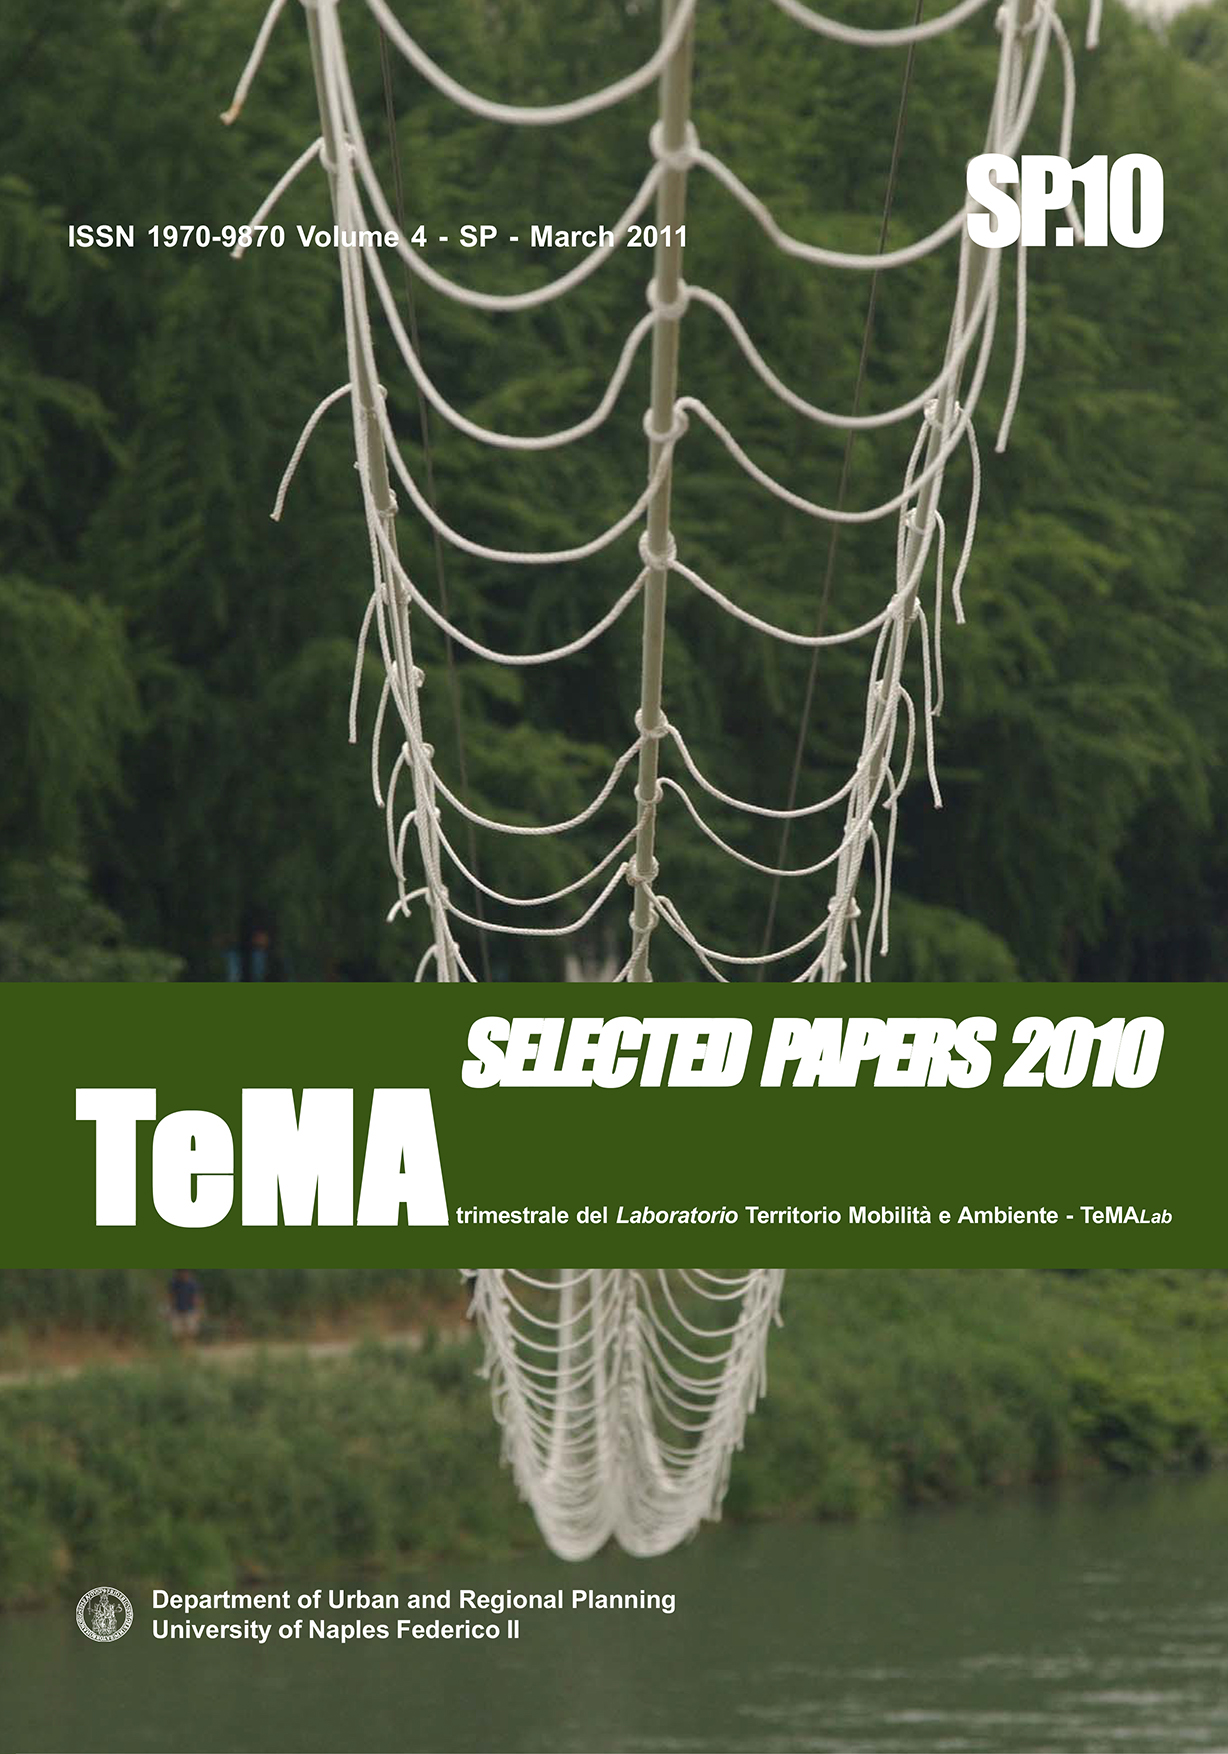 14_Selected Papers 2010